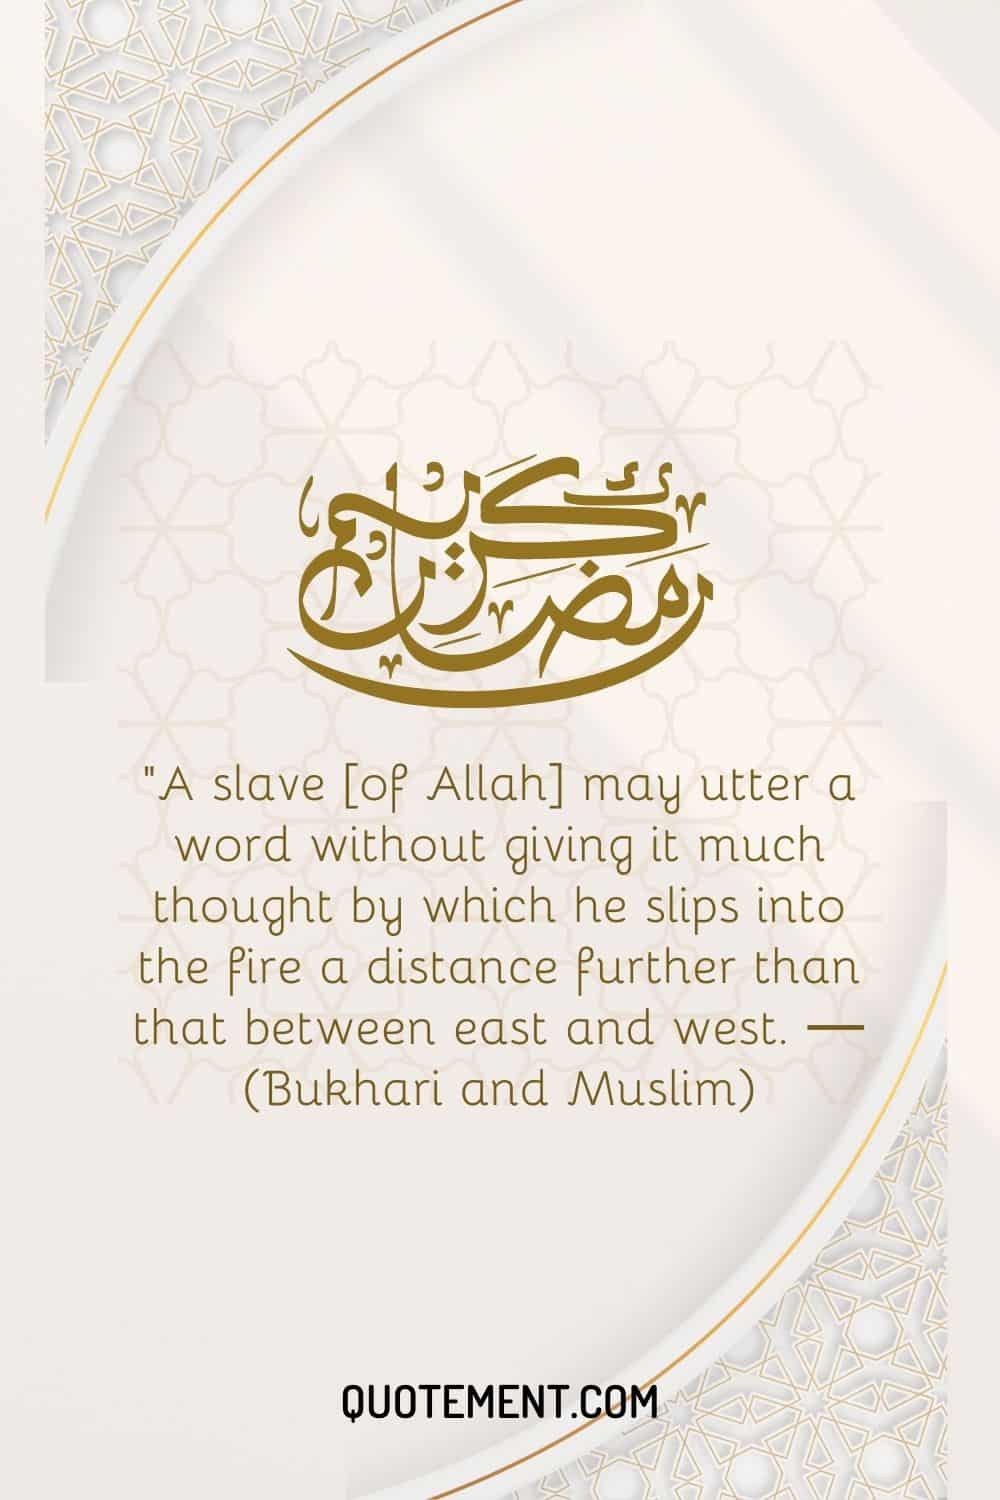 A slave [of Allah] may utter a word without giving it much thought by which he slips into the fire a distance further than that between east and west (2)